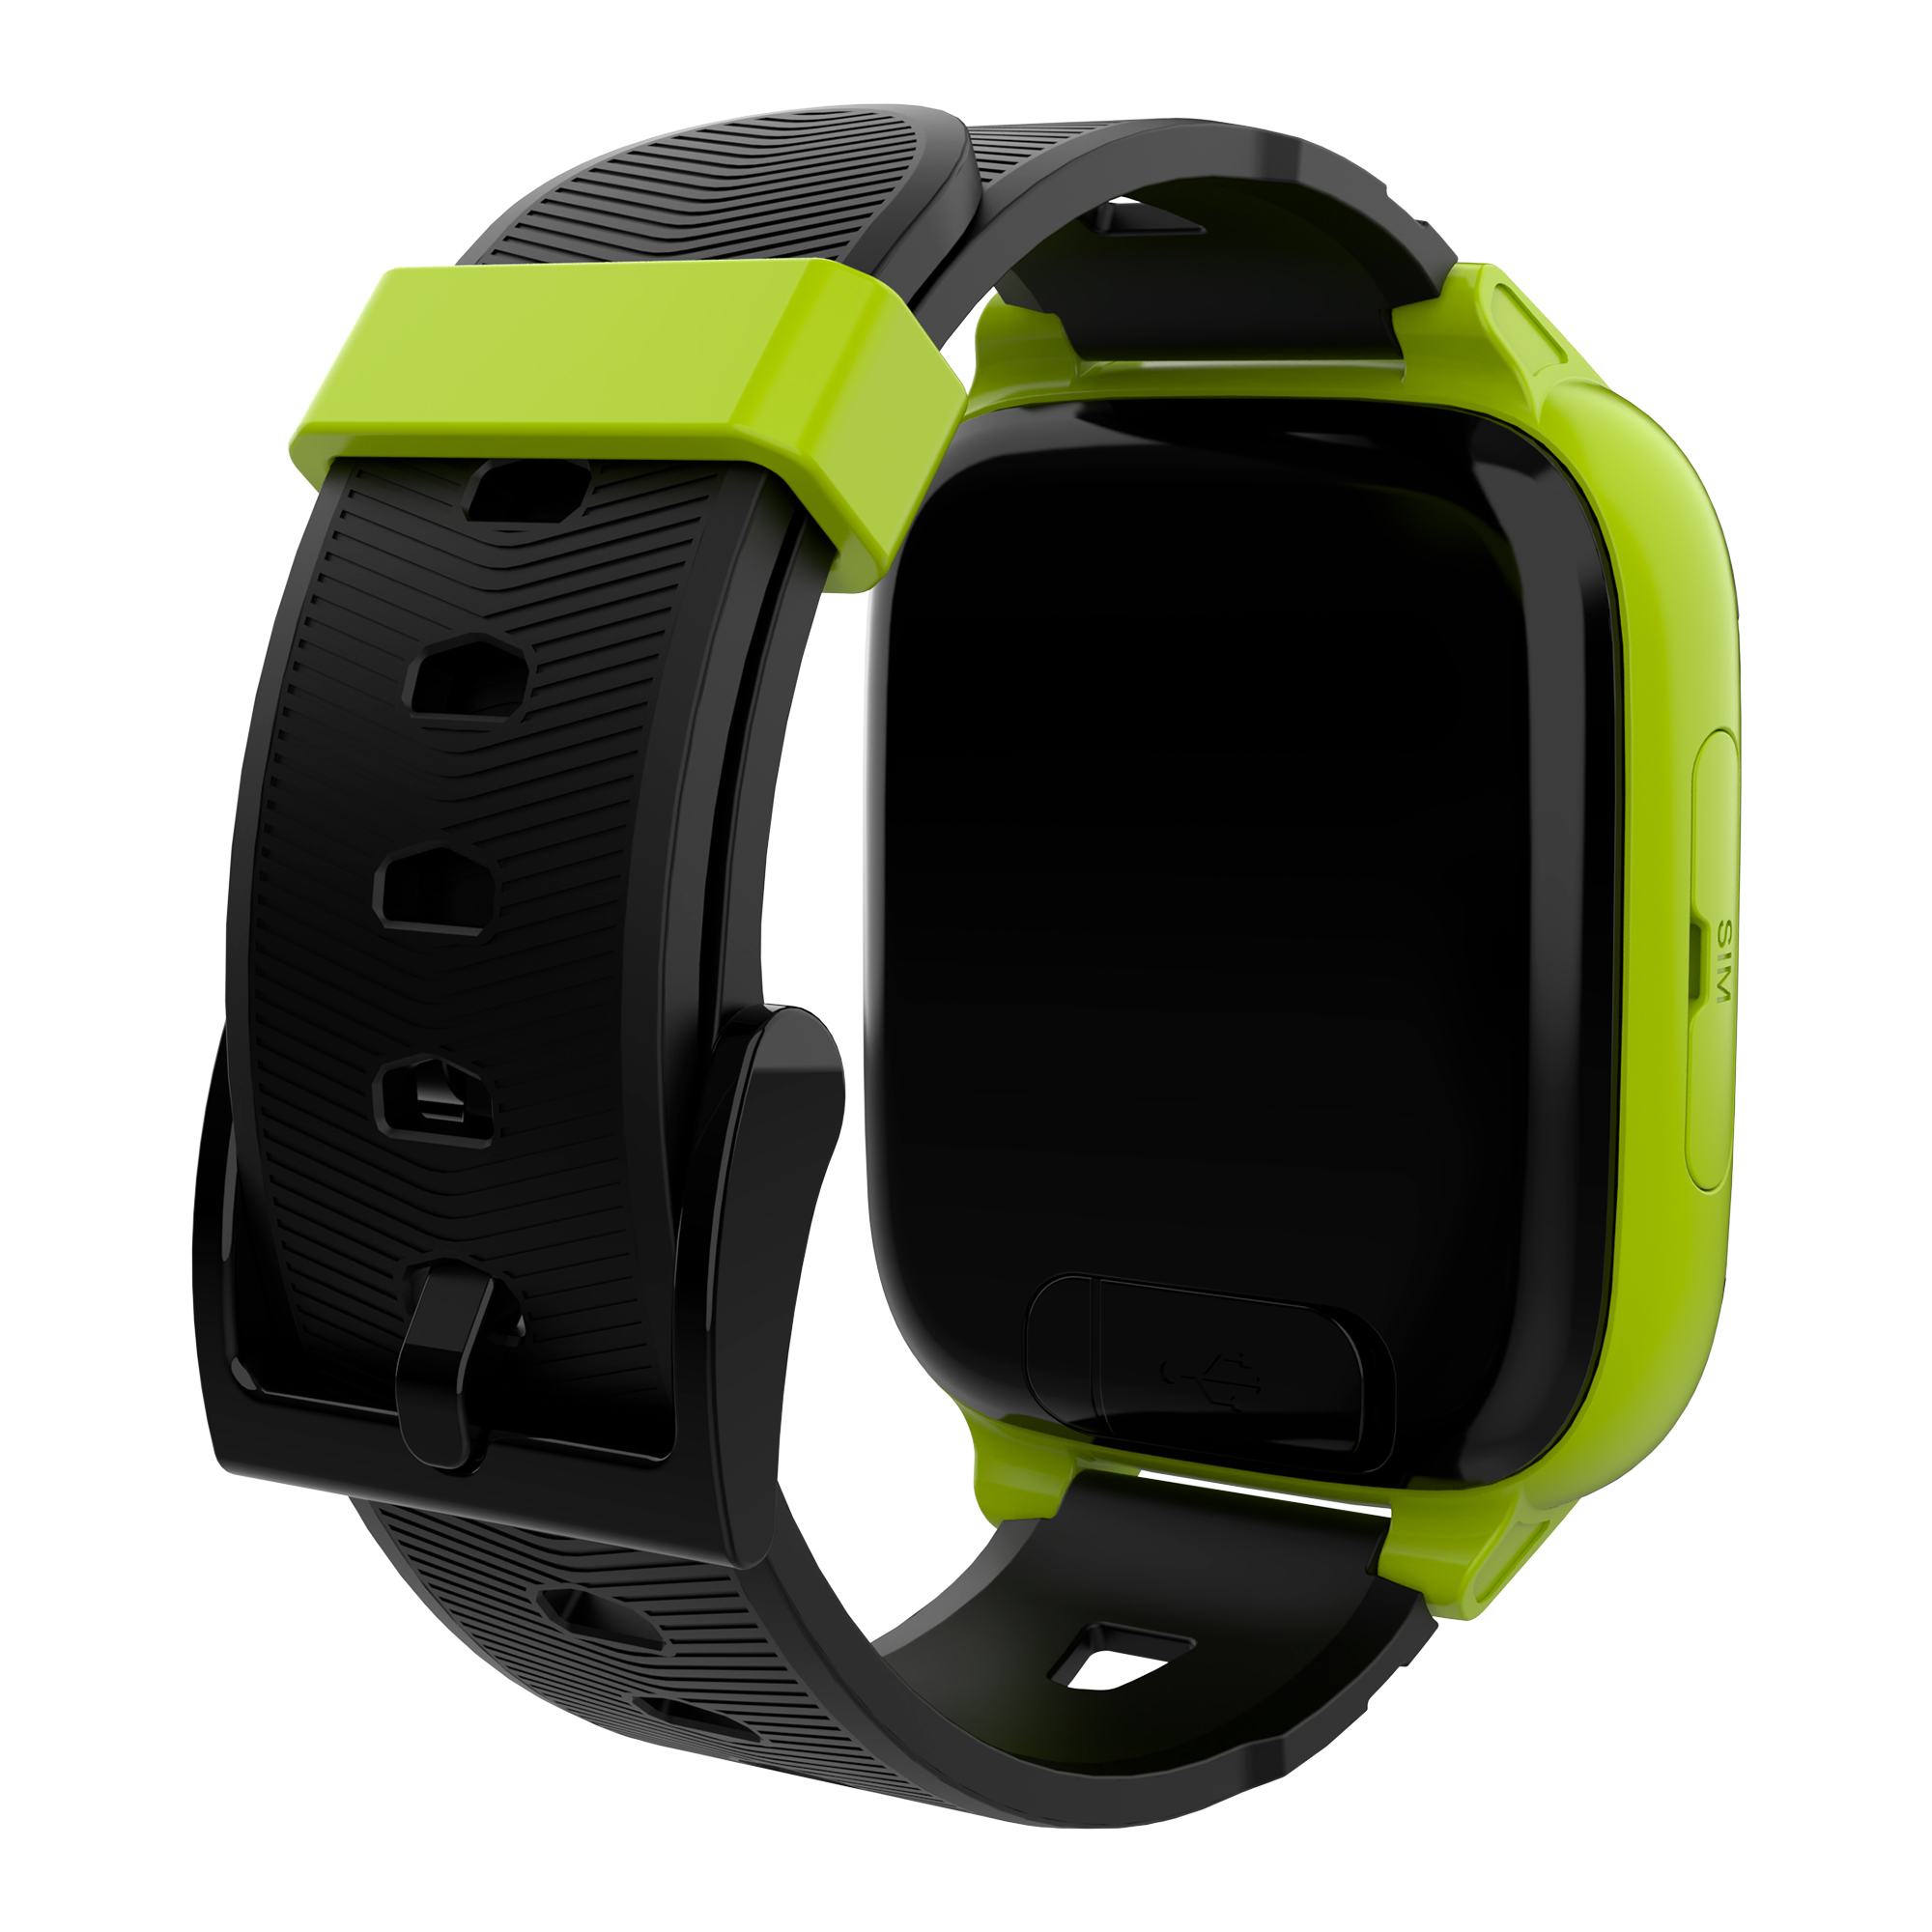 Back View: Xplora - Kids' XGO3 (GPS + Cellular) Smartwatch 42mm Calls, Messages, SOS, GPS Tracker, Camera, Step Counter, SIM Card included - Green